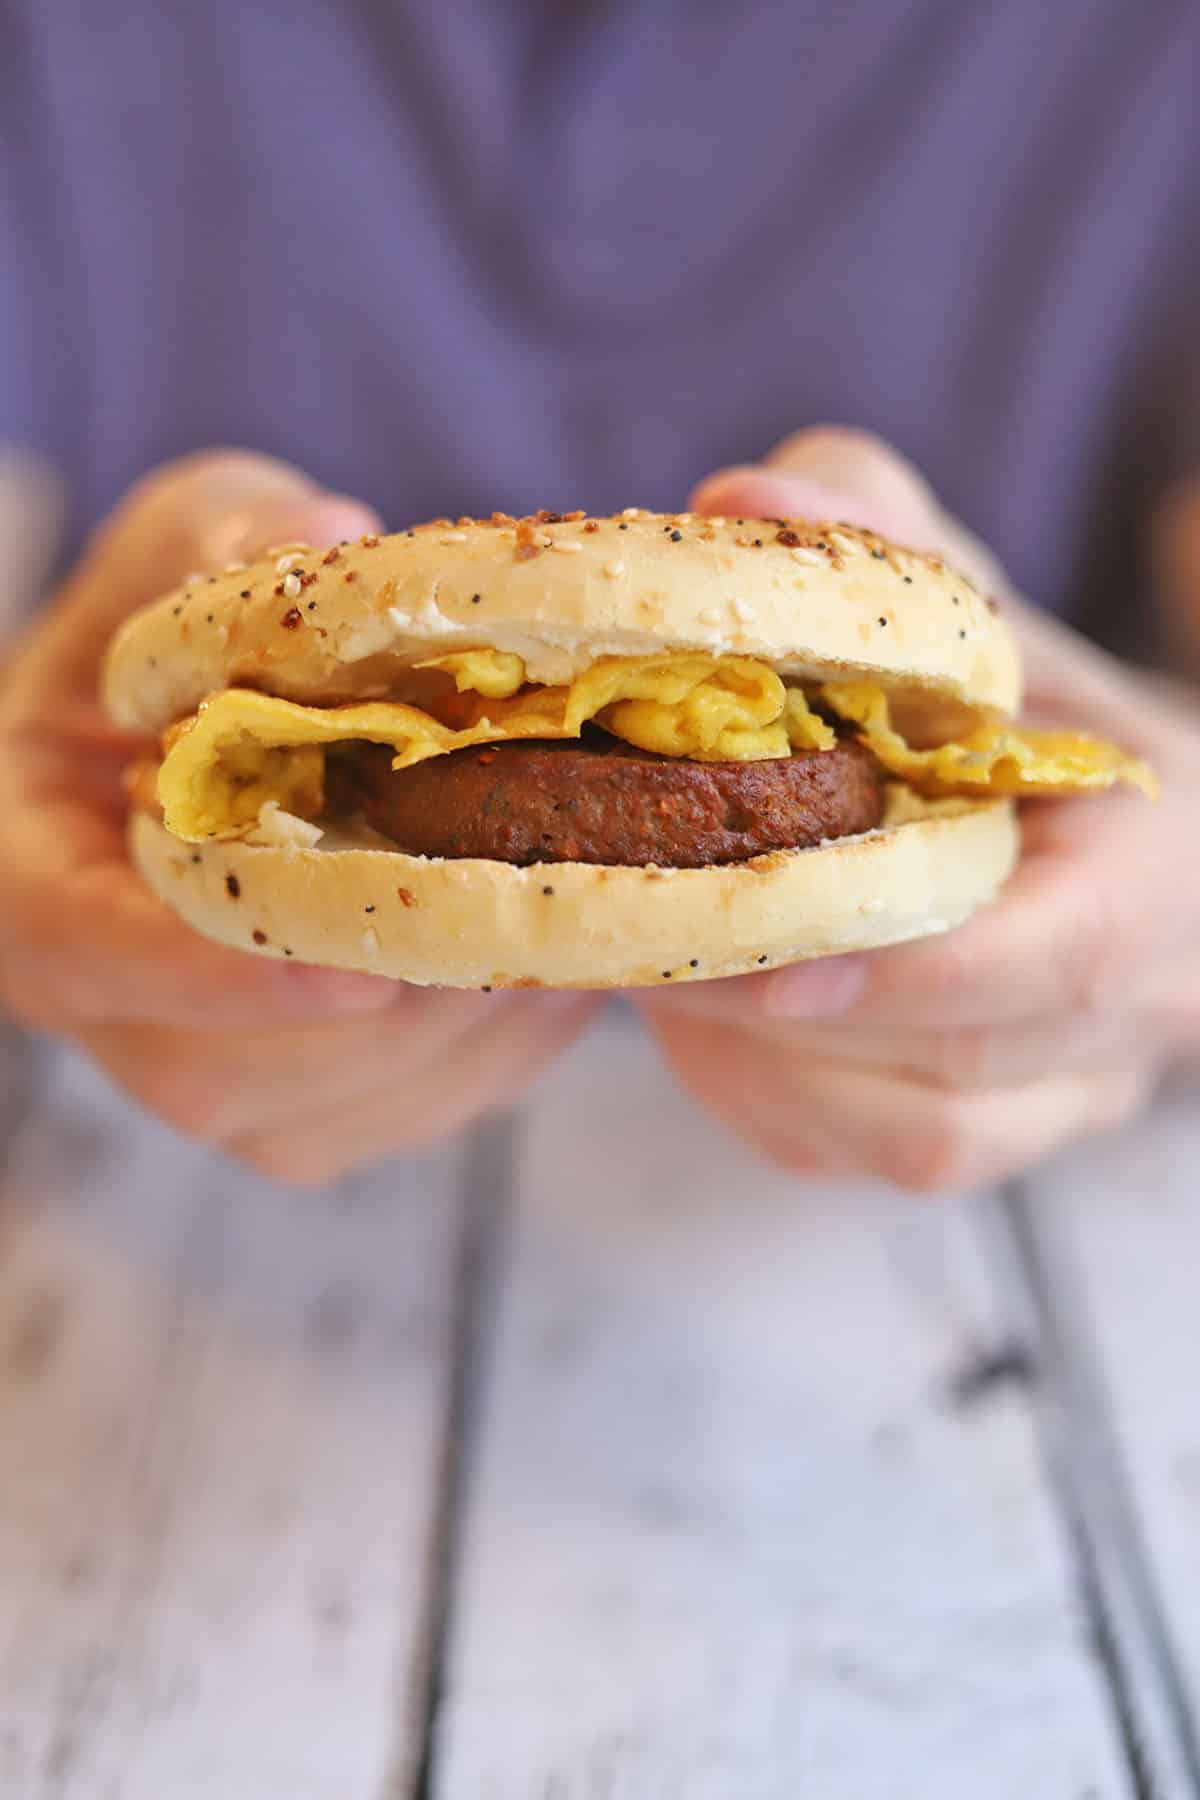 Hand holding bagel sandwich with Just Egg, vegan sausage, and vegan cream cheese.